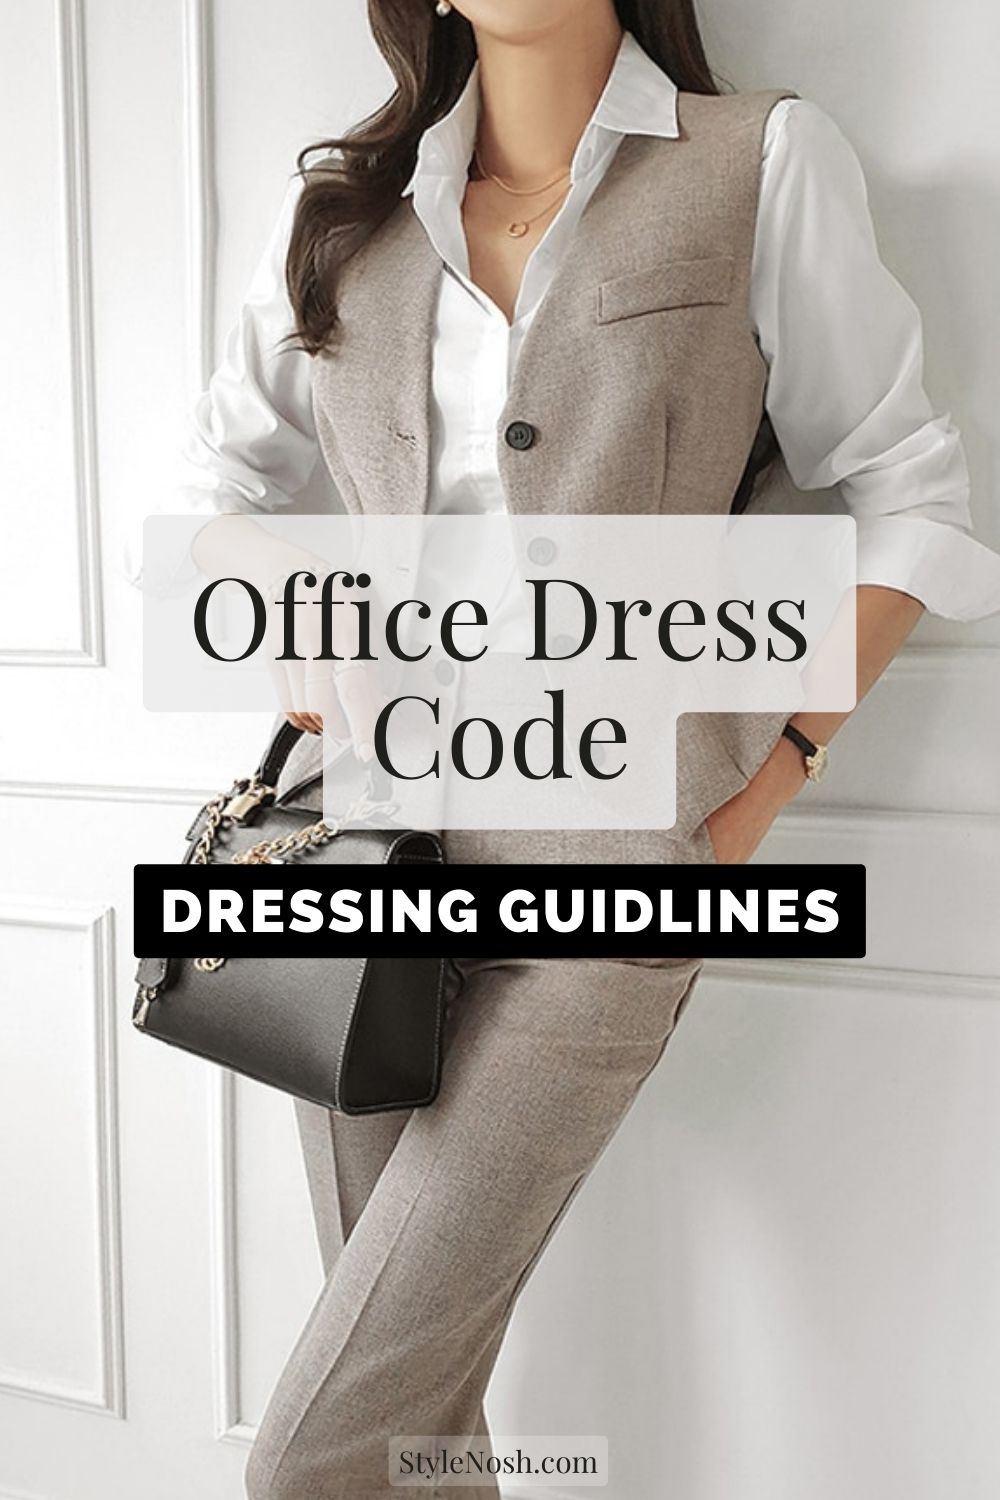 The Evil Side of the Office Dress Code